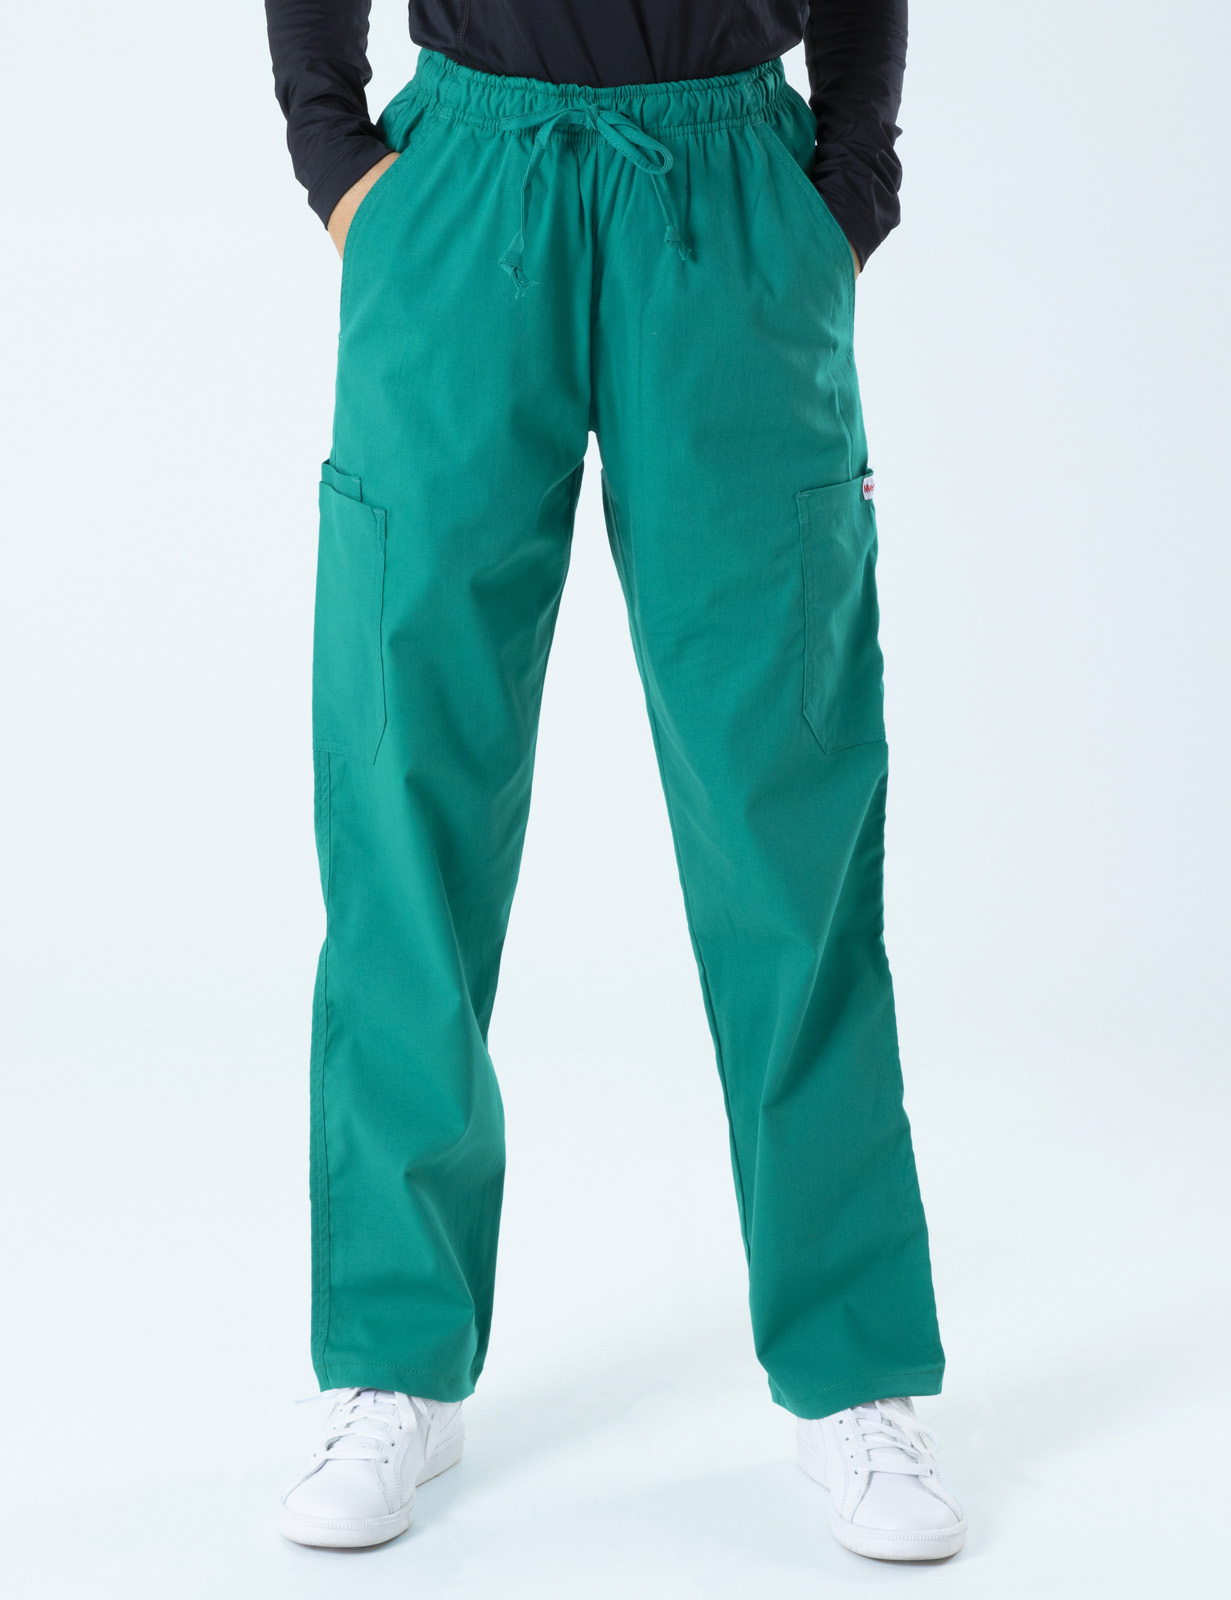 Children's Hospital Melbourne - ED (Women's Fit Solid Scrub Top and Cargo Pants in Hunter incl Logos)